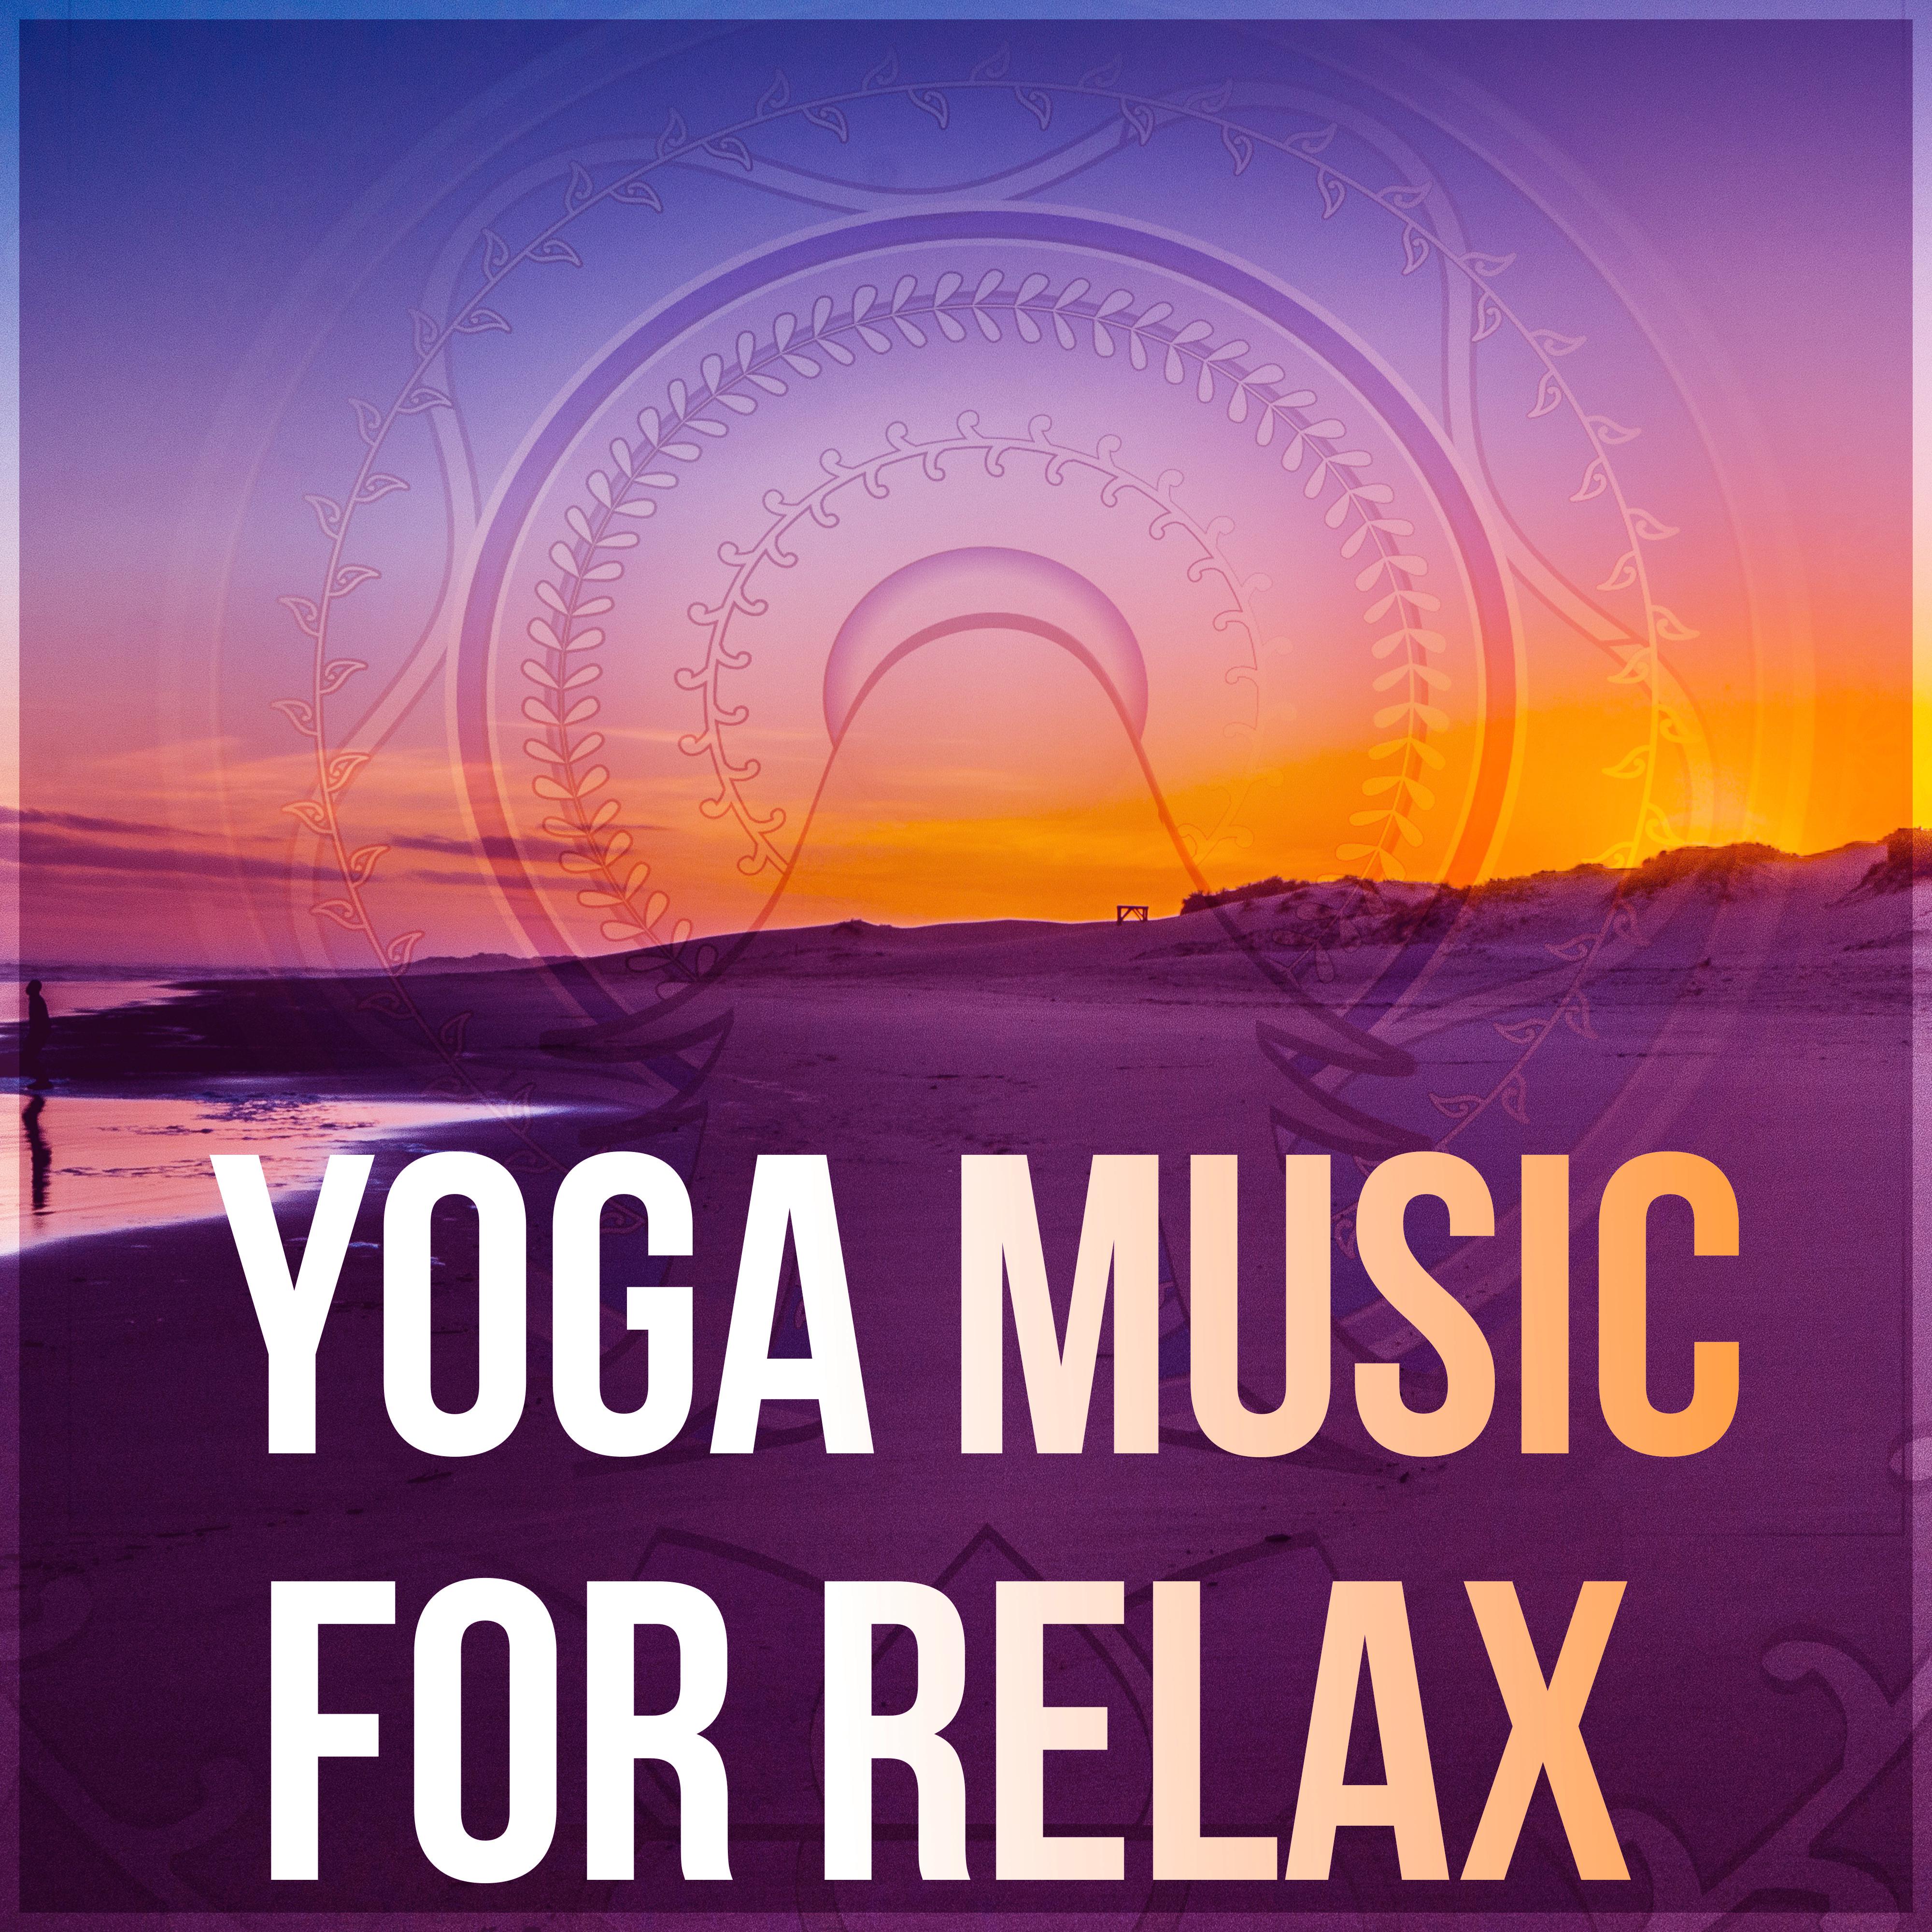 Yoga Music for Relax - Relaxing Nature Sounds Healing Music 4 Yoga, Native American Flute Meditation, Instrumental Music for Massage Therapy, Reiki Healing